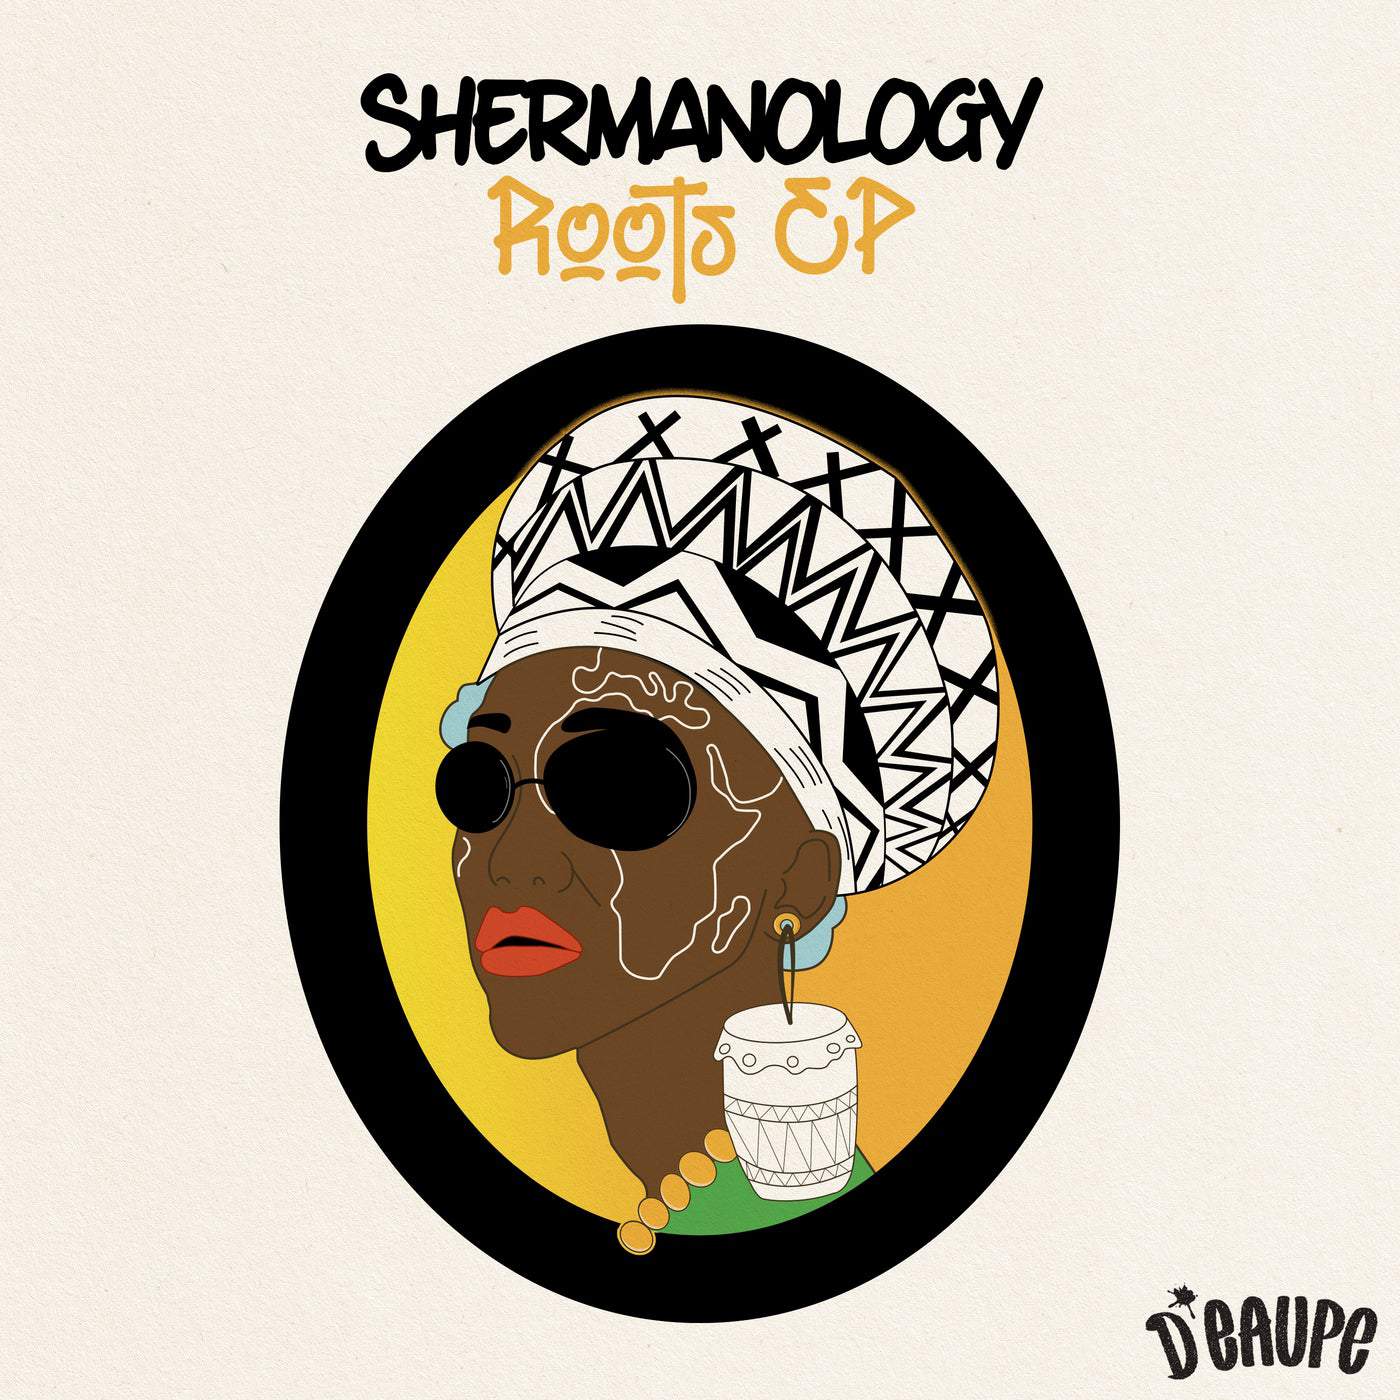 image cover: Roots EP, Pt. 1 by Shermanology on D'EAUPE